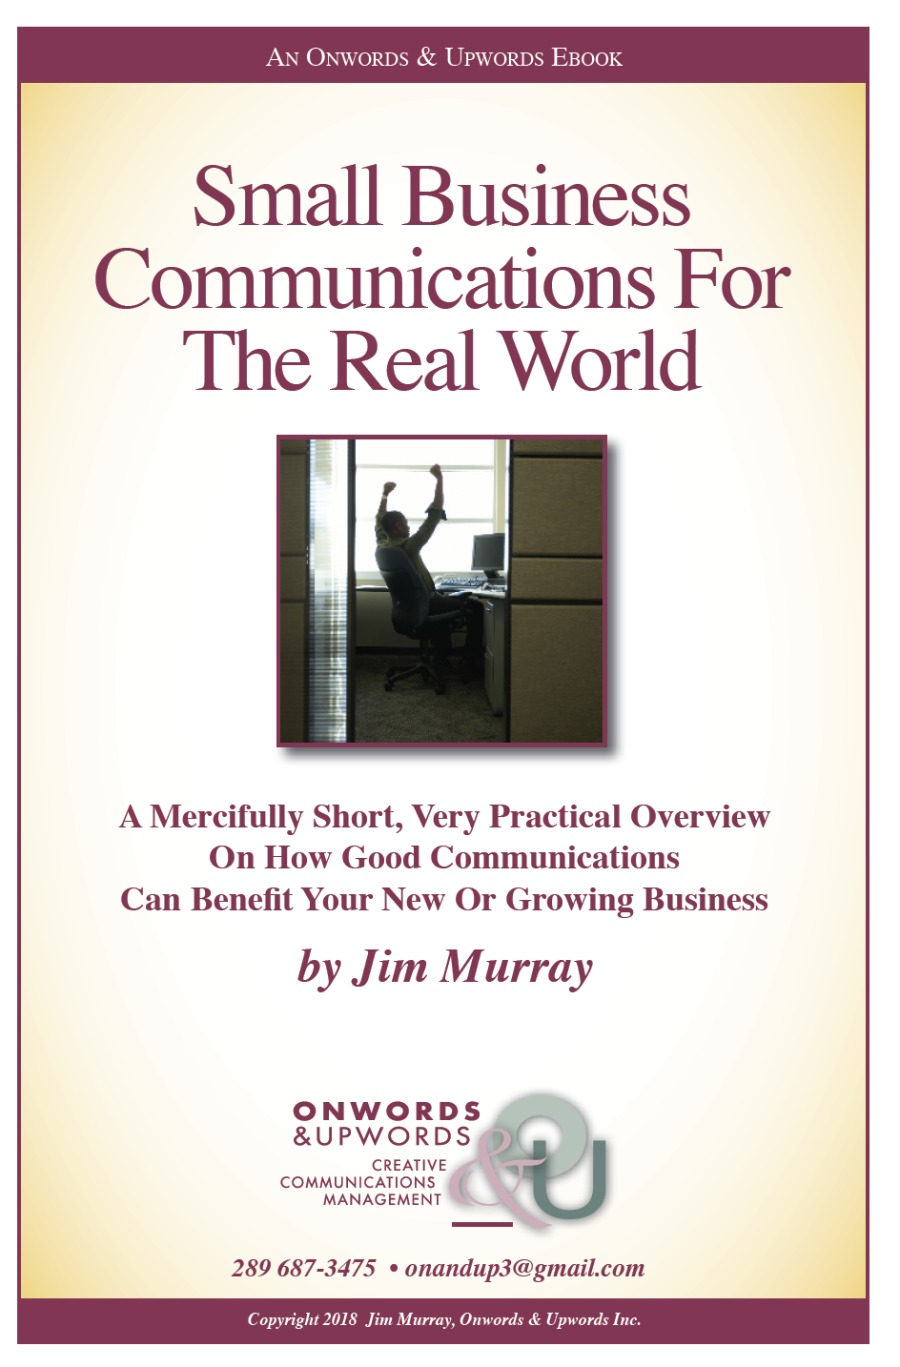 AN ONWORDS & UpwoORDS EBOOK

Small Business
Communications For
The Real World

A Mercifully Short, Very Practical Overview
On How Good Communications
Can Benefit Your New Or Growing Business

by Jim Murray

ONWORDS

&UPWORDS &oi
CREATIVE J
COMMUNICATIONS
MANAGEMENT

289 687-3475 + onandup3@gmail.com

Copyright 2018 Jim Murray, Onwords & Upwords Inc.